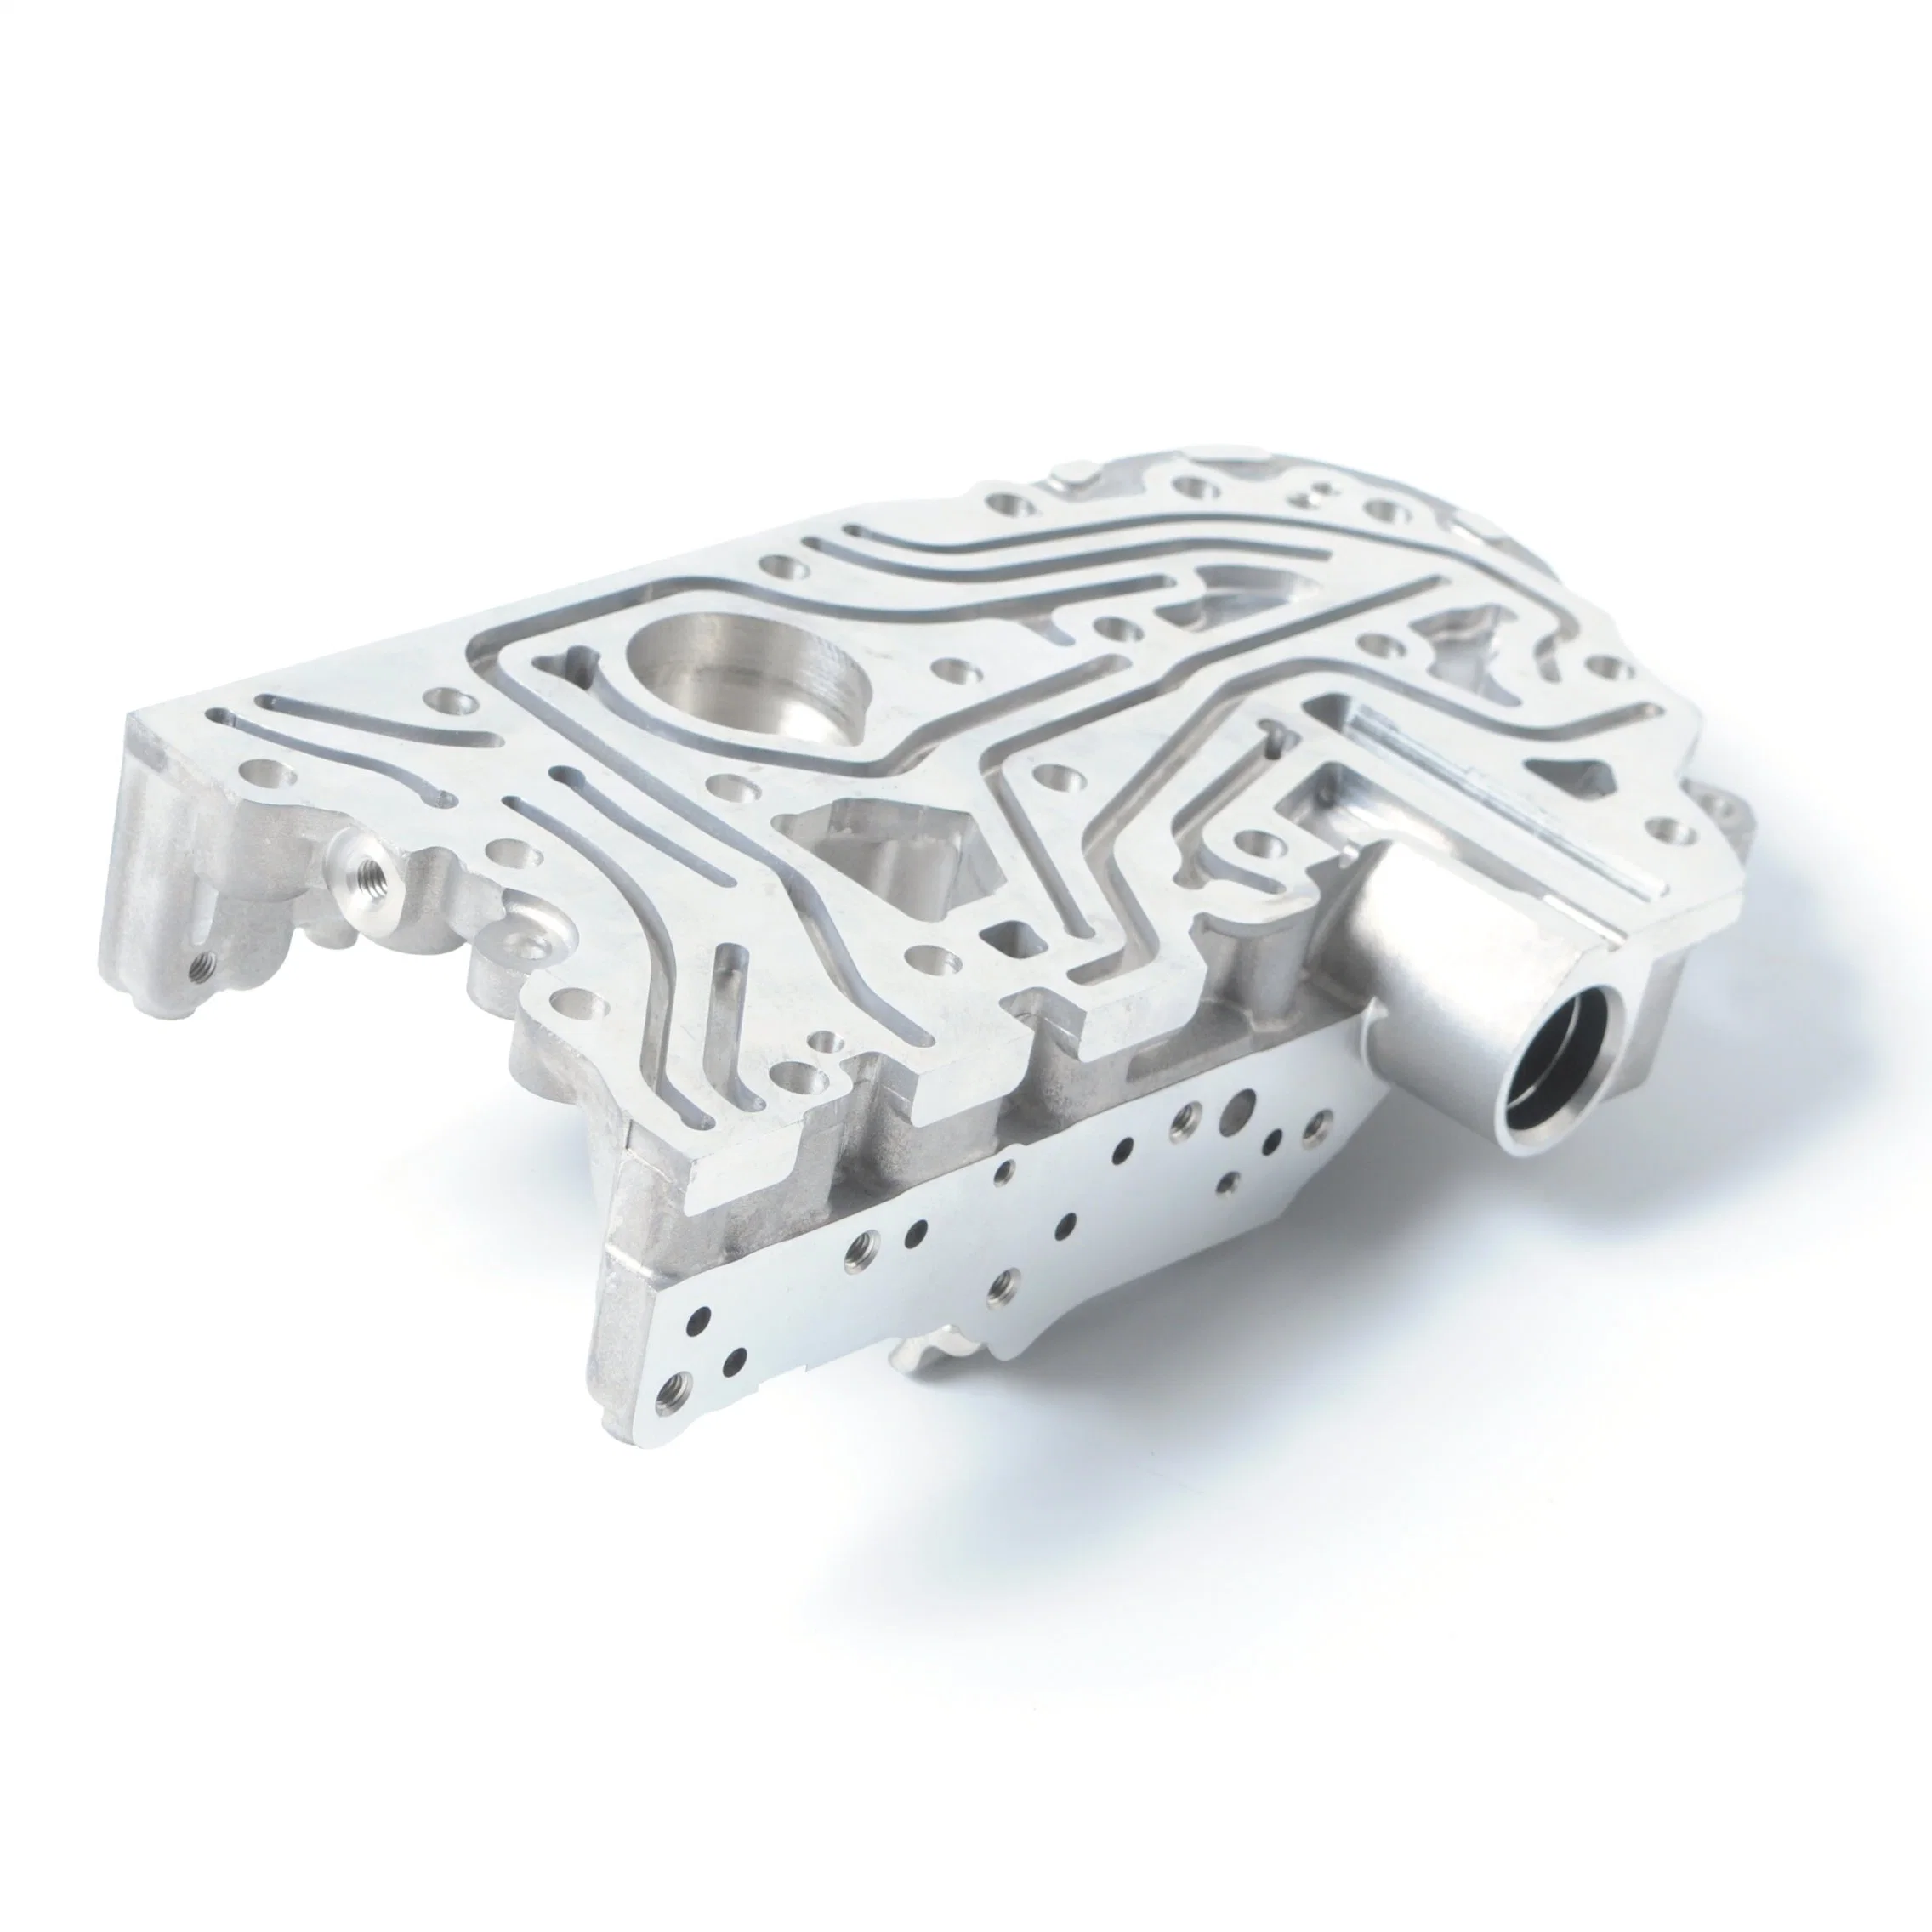 High Pressure Die Casting Components for Auto Parts